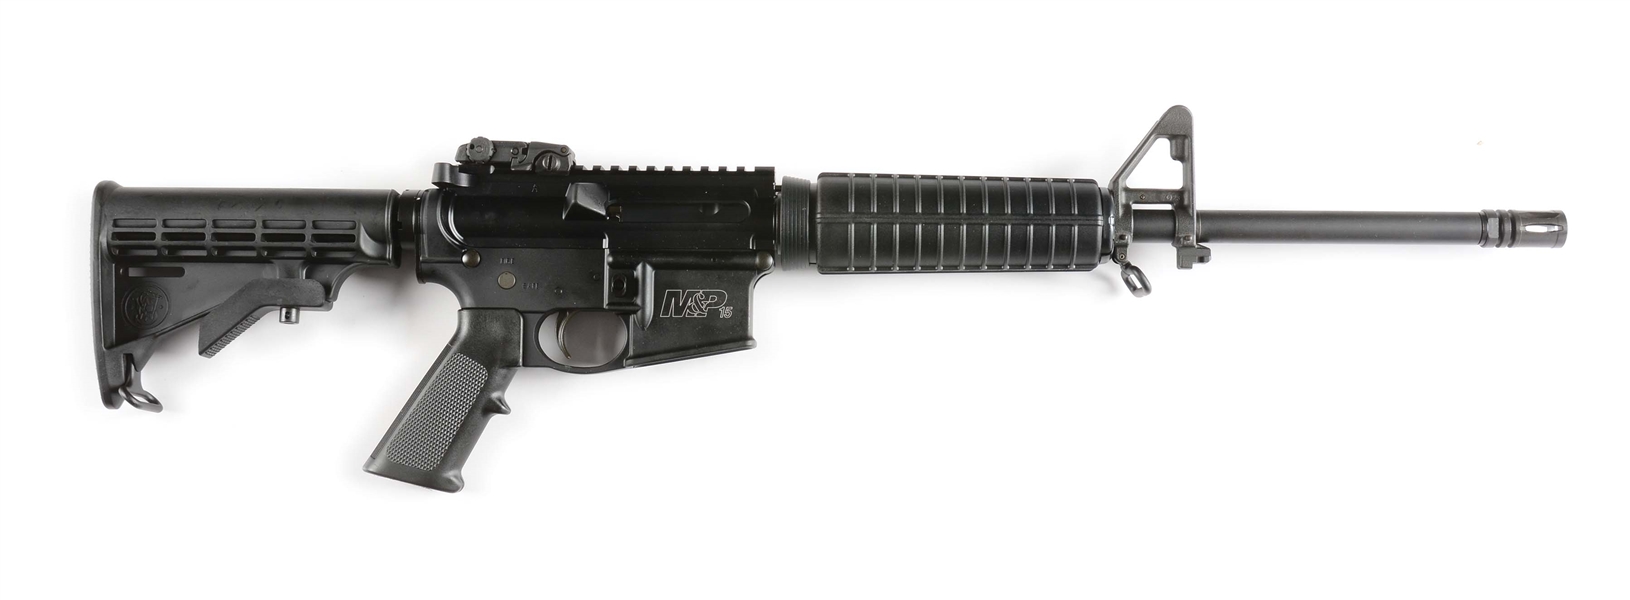 (M) SMITH AND WESSON M&P-15 SEMI-AUTOMATIC RIFLE.